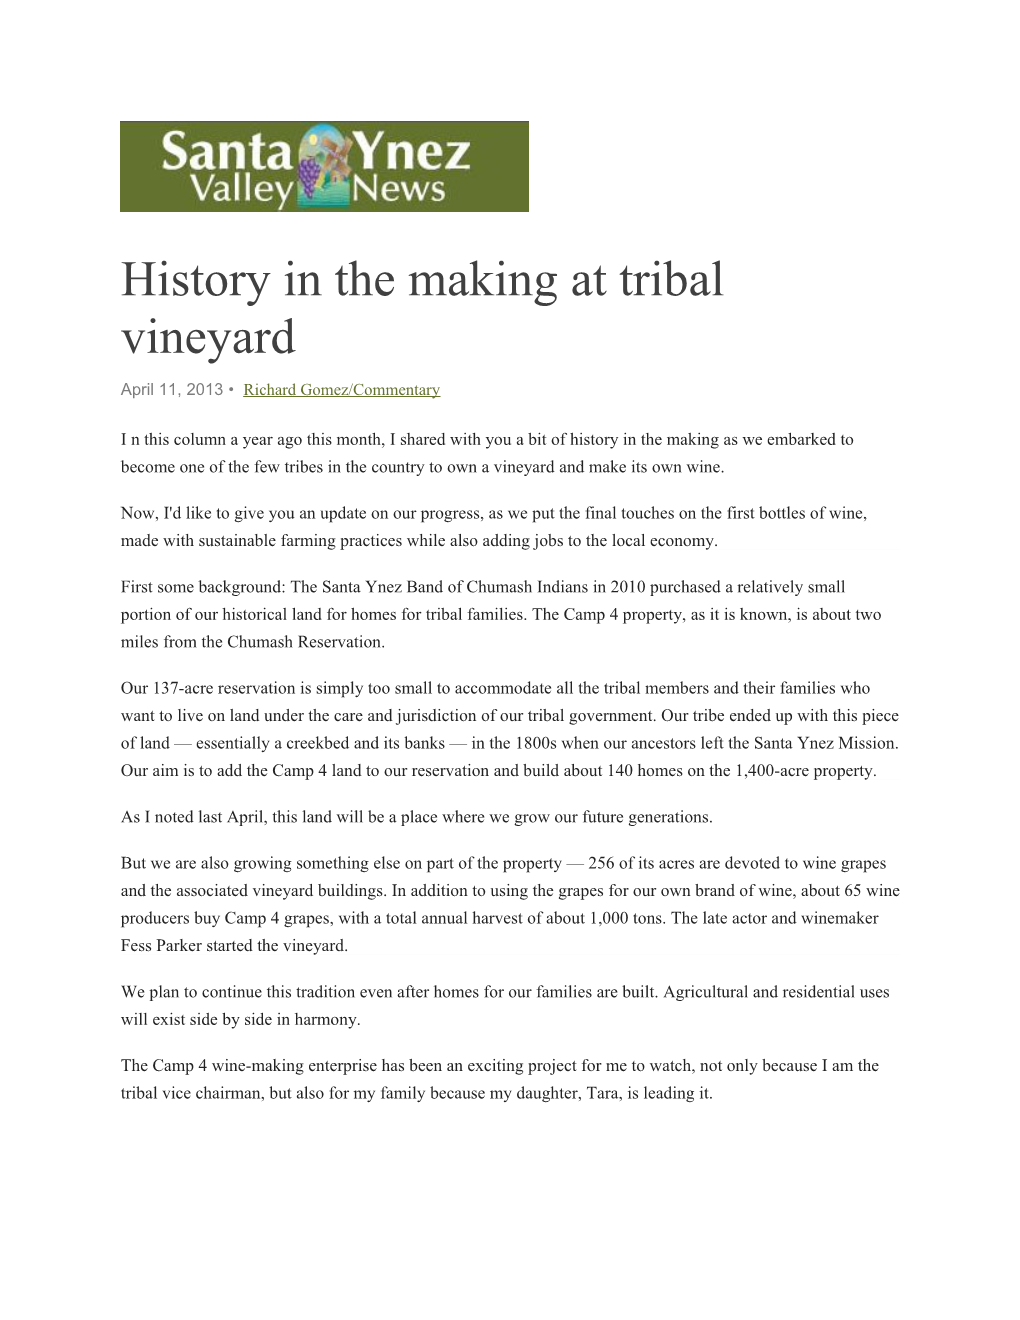 History in the Making at Tribal Vineyard